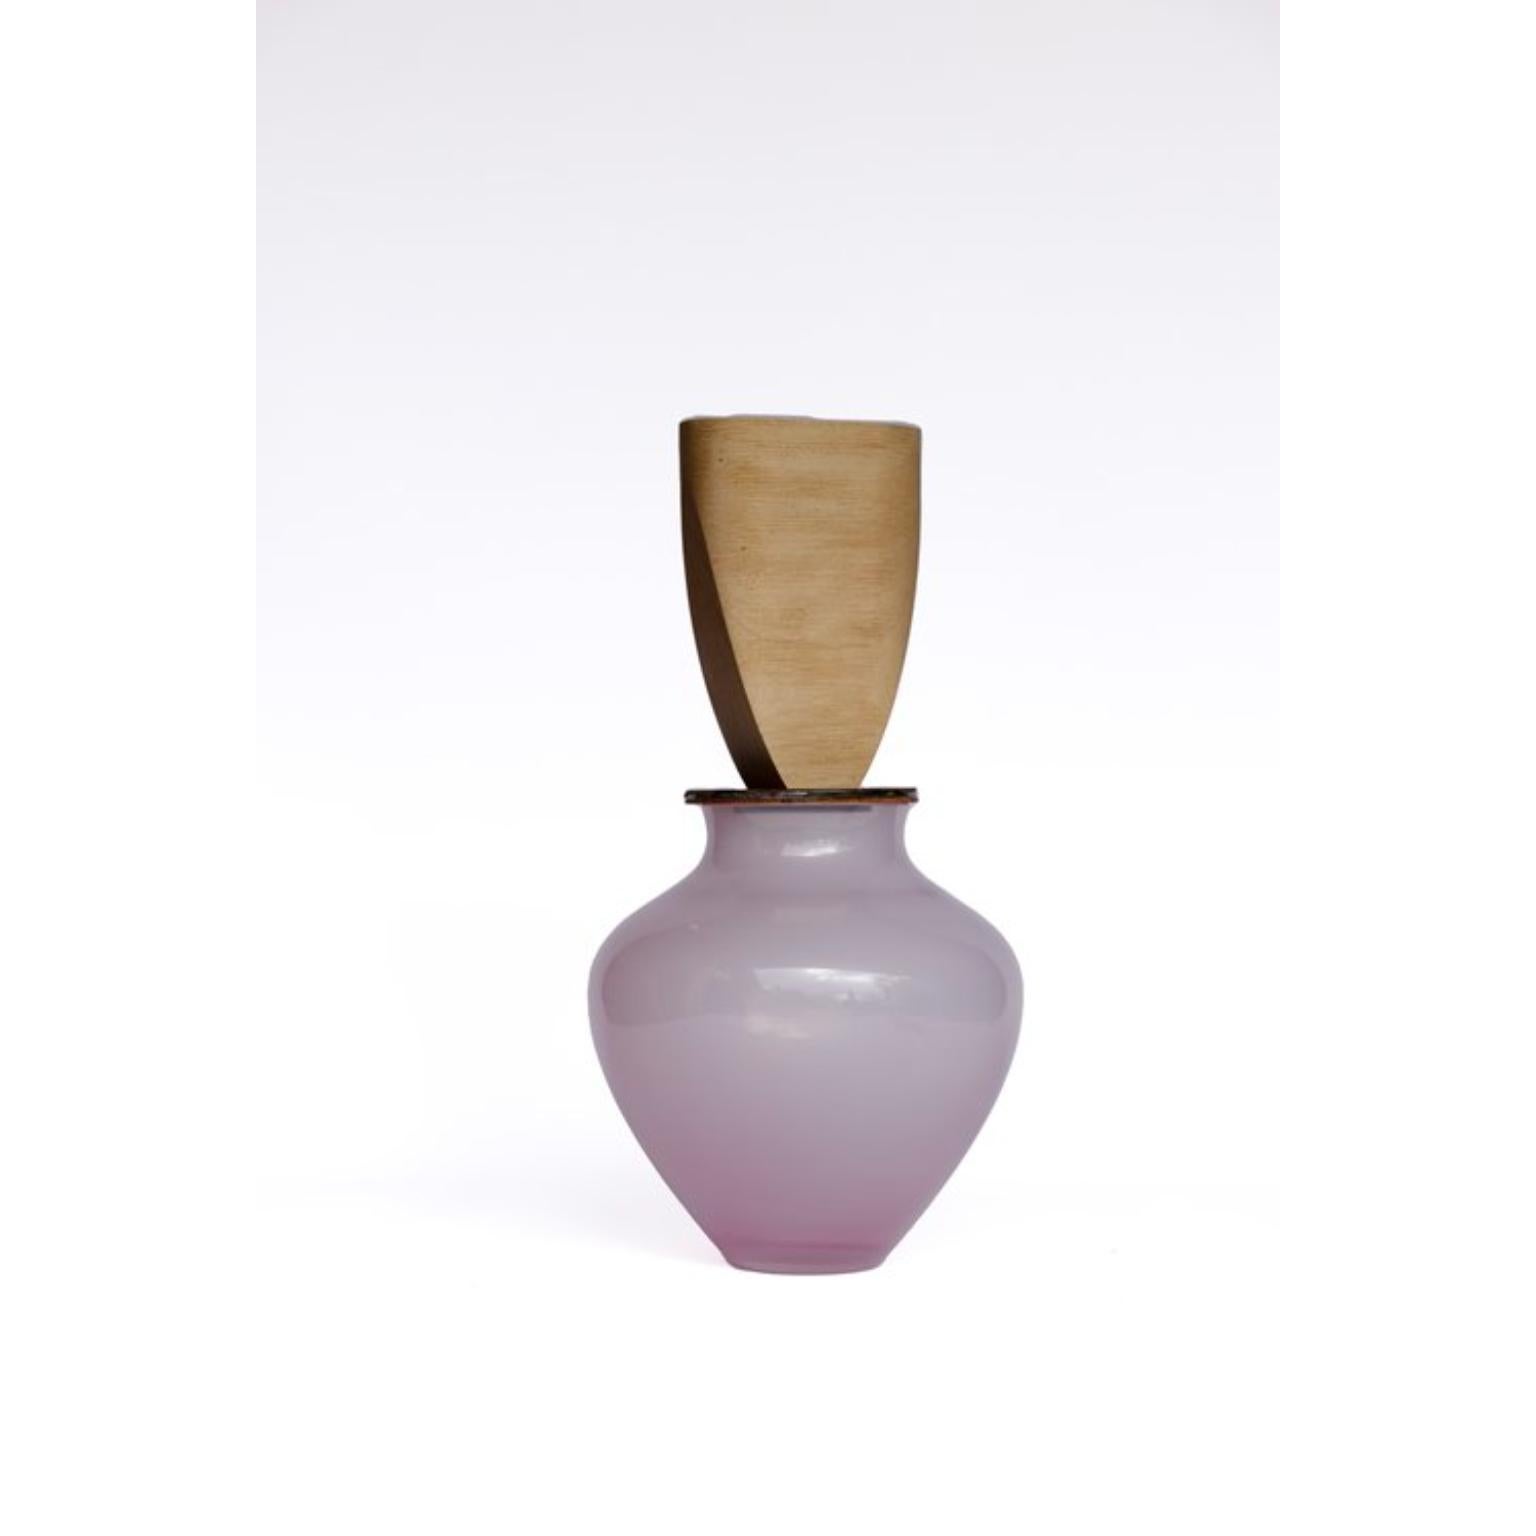 Ohana Stacking Petal & Tall Triangle Vessel by Pia Wüstenberg
Unique Piece. Handmade In Europe.
Dimensions: Ø 19 x H 34 cm.
Materials: Handblown glass, ceramic and wood.

Available in different color options. Dimensions are approximate, due to the